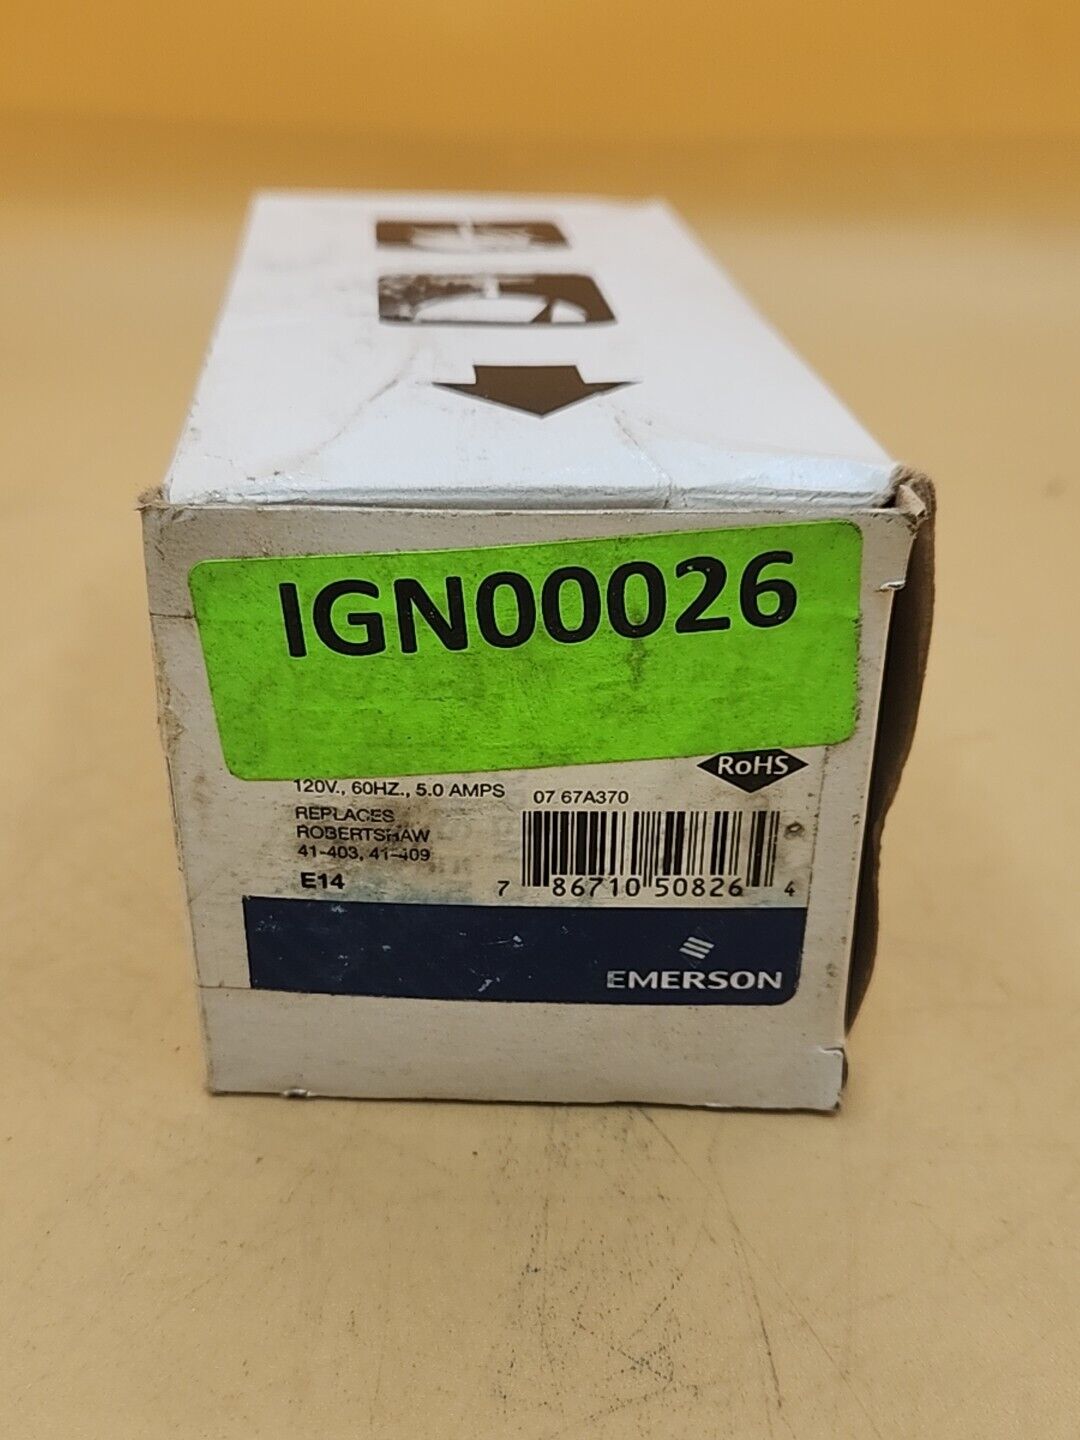 White Rodgers 767A-370 Hot Surface Ignitor Carrier Trane Rheem OEM IGN00026 